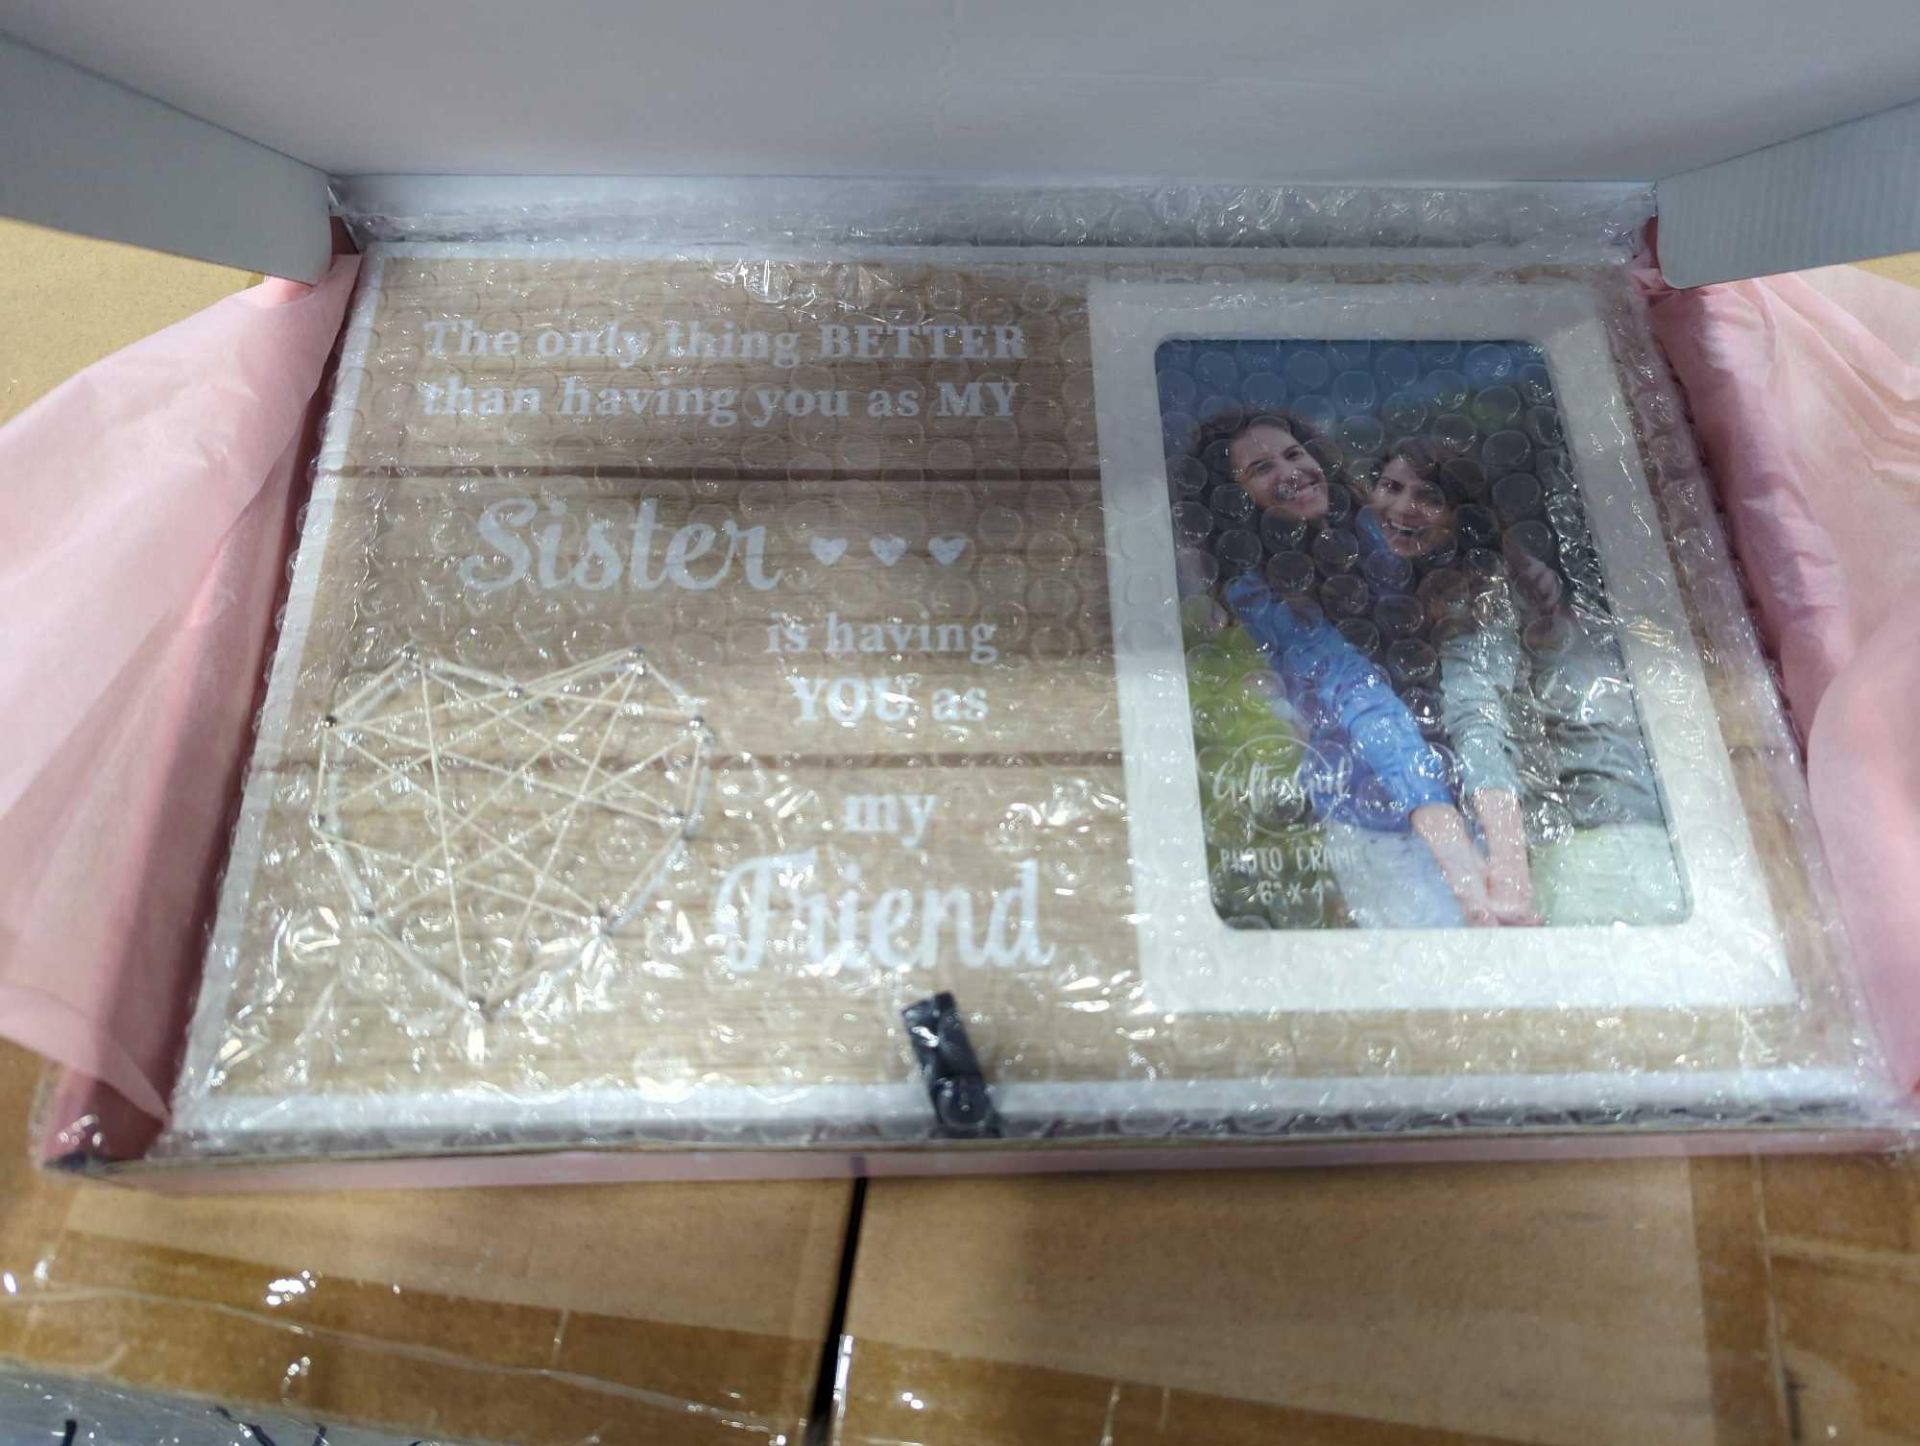 Pallet- Decor: The only thing better than having you as my sister, is having you as my friend